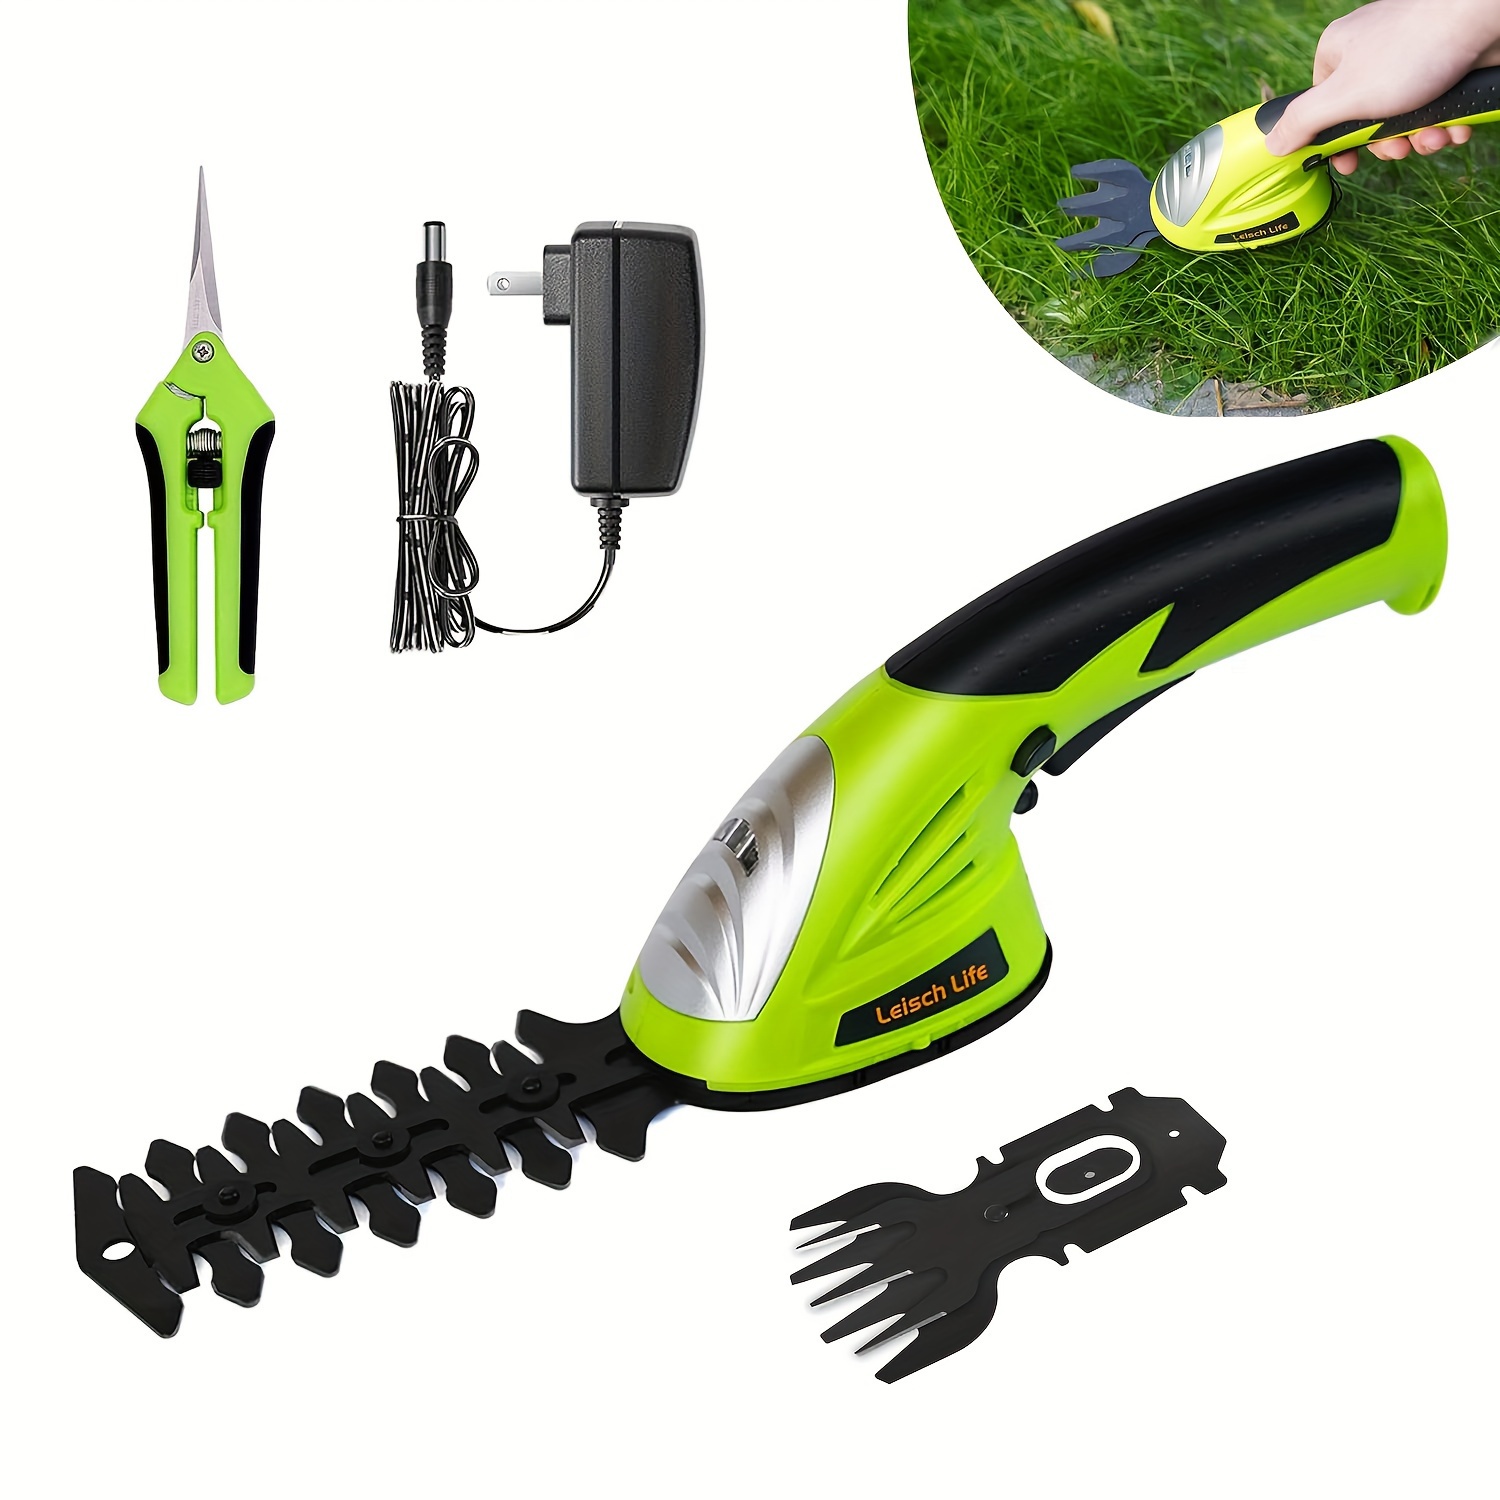 

Cordless Grass Shear & Shrubbery Trimmer - 2 In 1 Handheld Hedge Trimmer, Electric Grass Trimmer Hedge Shears/grass Cutter W/pruning Scissor Rechargeable Lithium-ion Battery And Charger Included